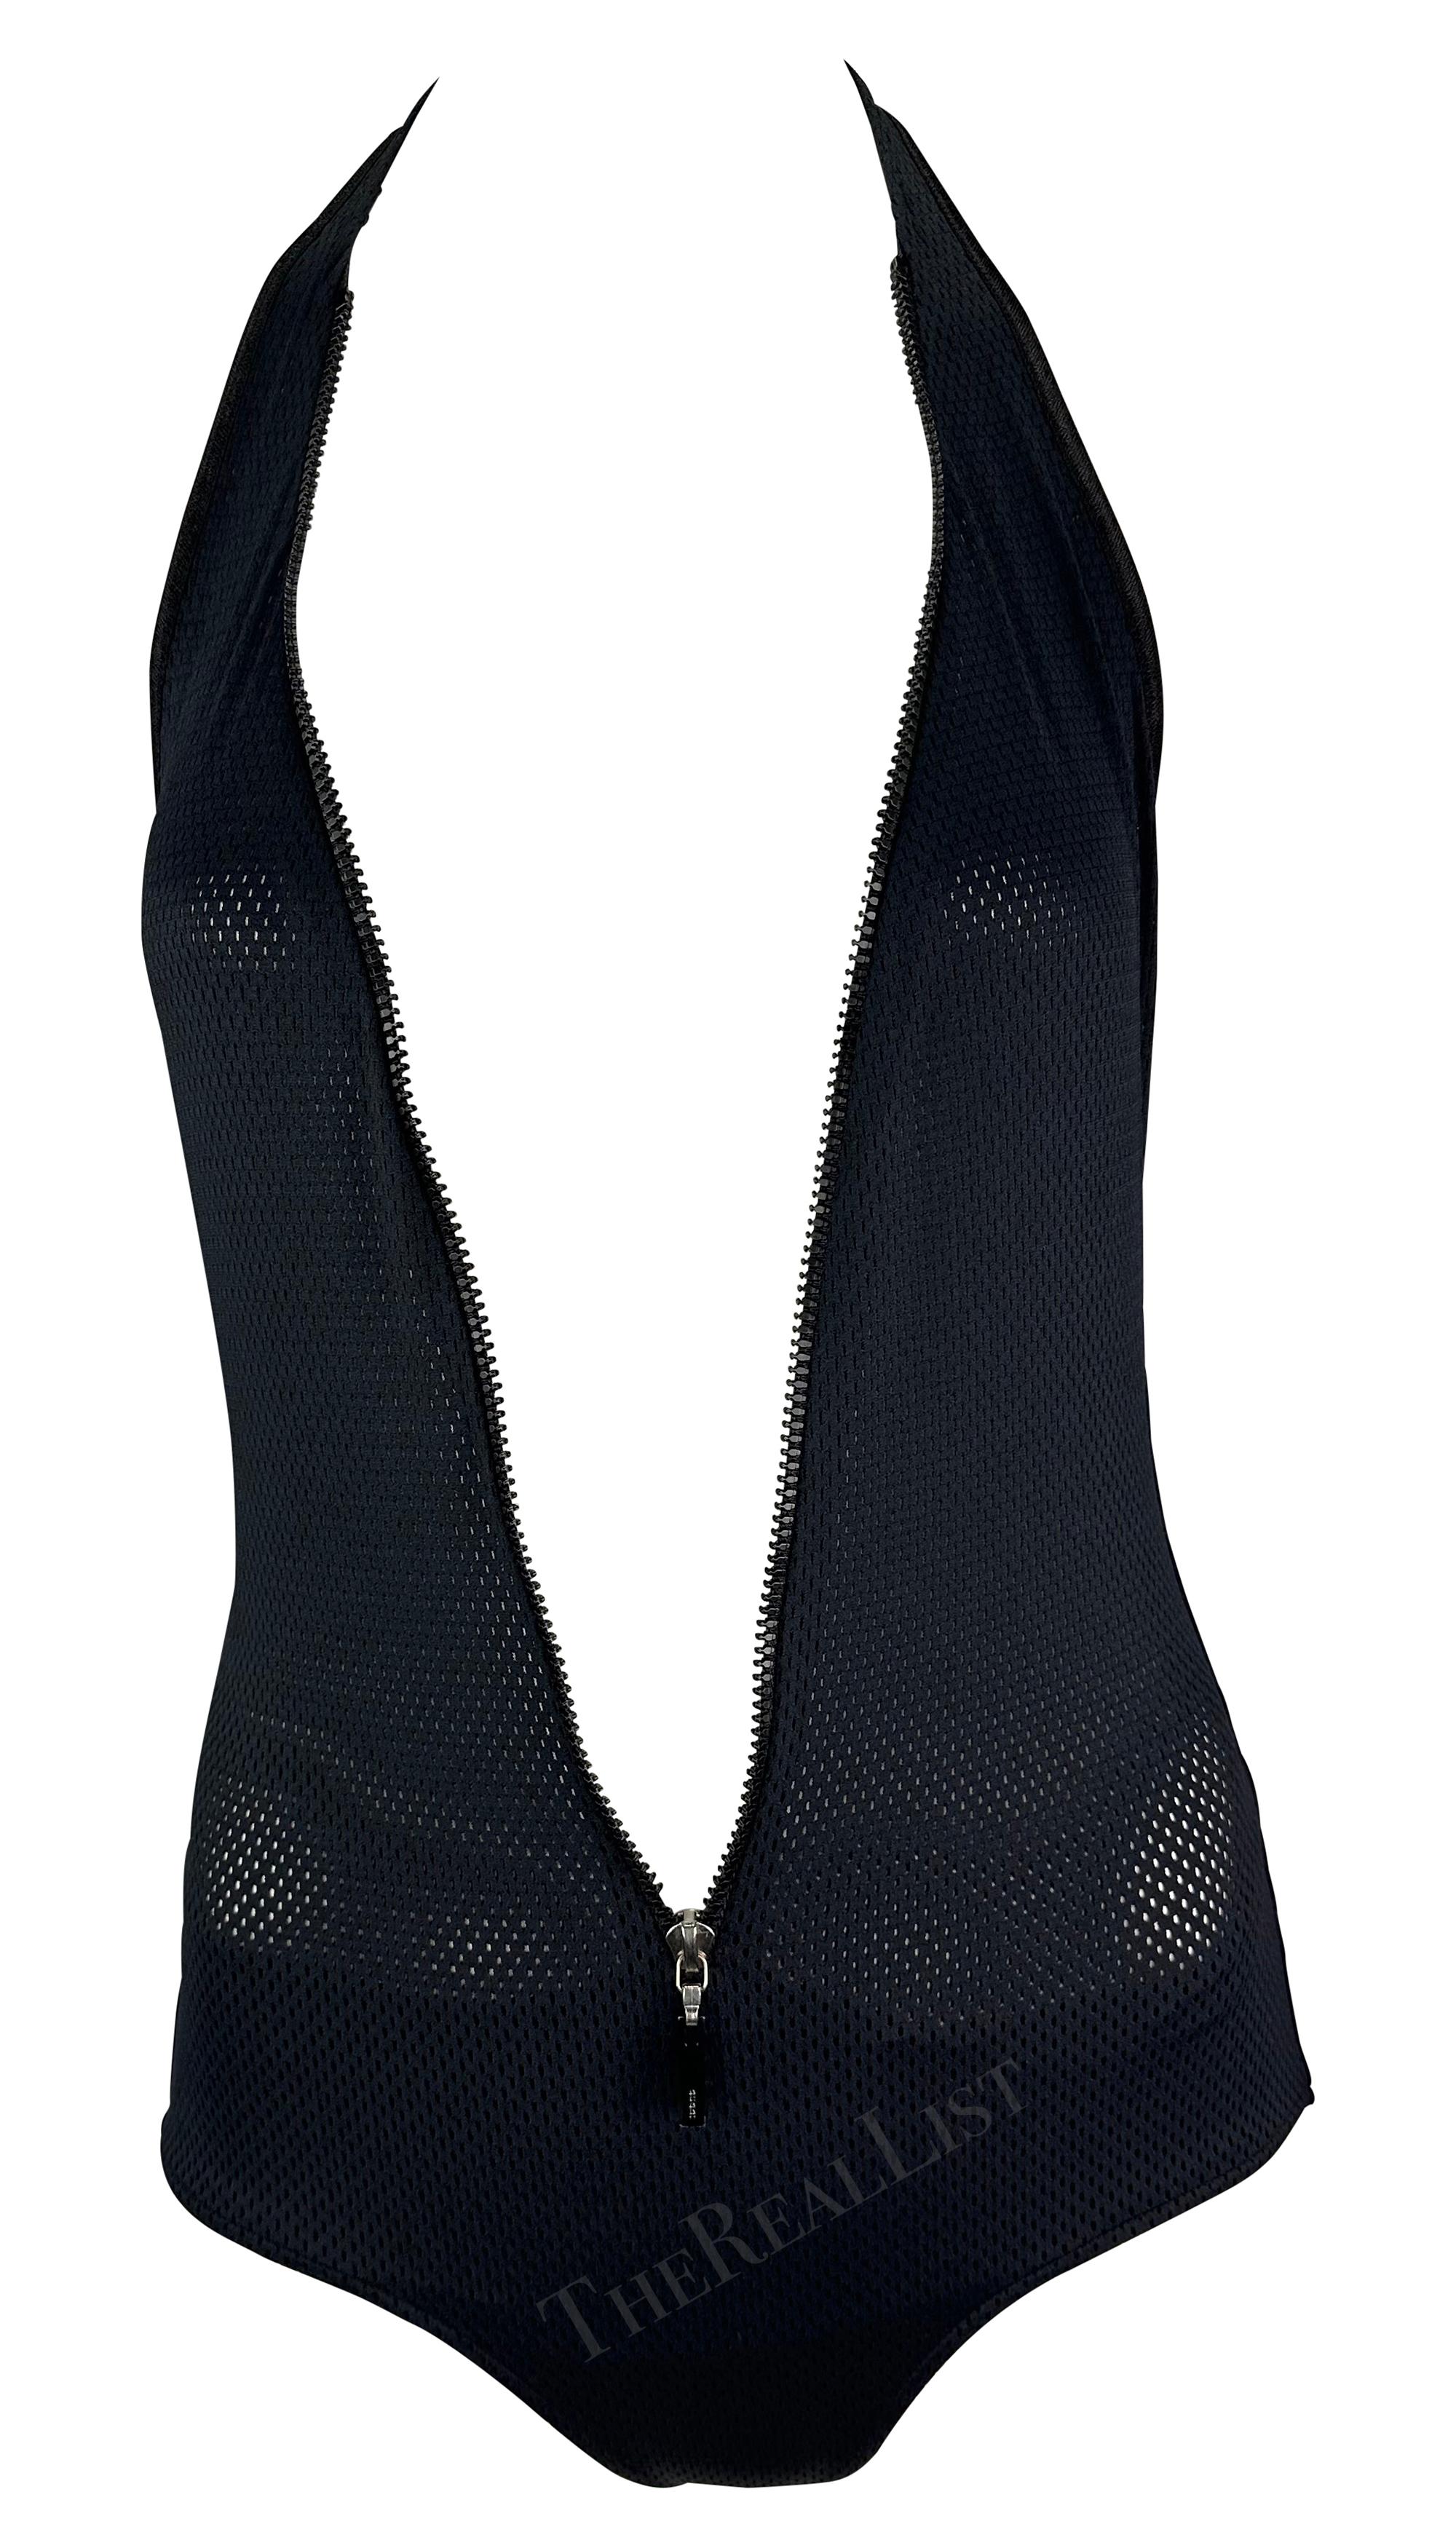 Presenting an ultra-sexy black mesh Gucci one-piece swimsuit, designed by Tom Ford. From the Spring/Summer 2002 collection, this mesh one-piece features a halter neck and zipper that runs downs the front. The zipper runs down to just above the hip